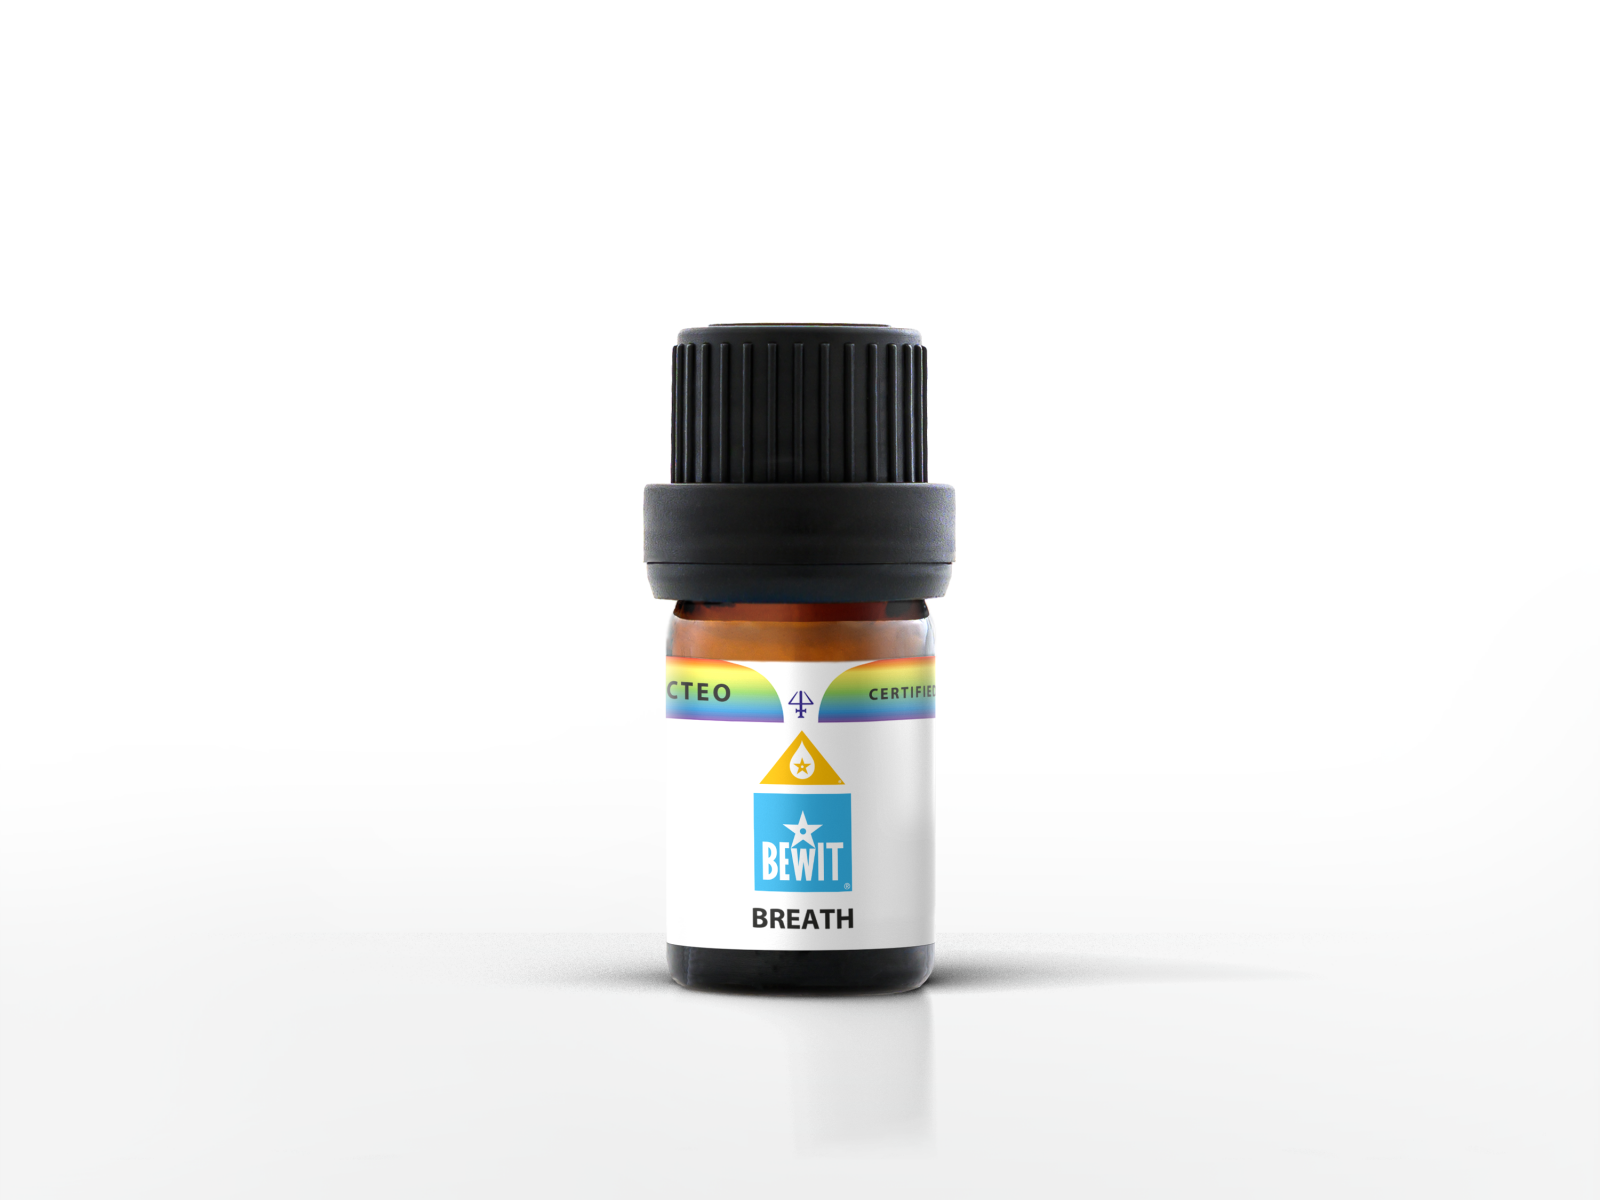 BEWIT BREATH - This is a blend of pure essential oils - 2